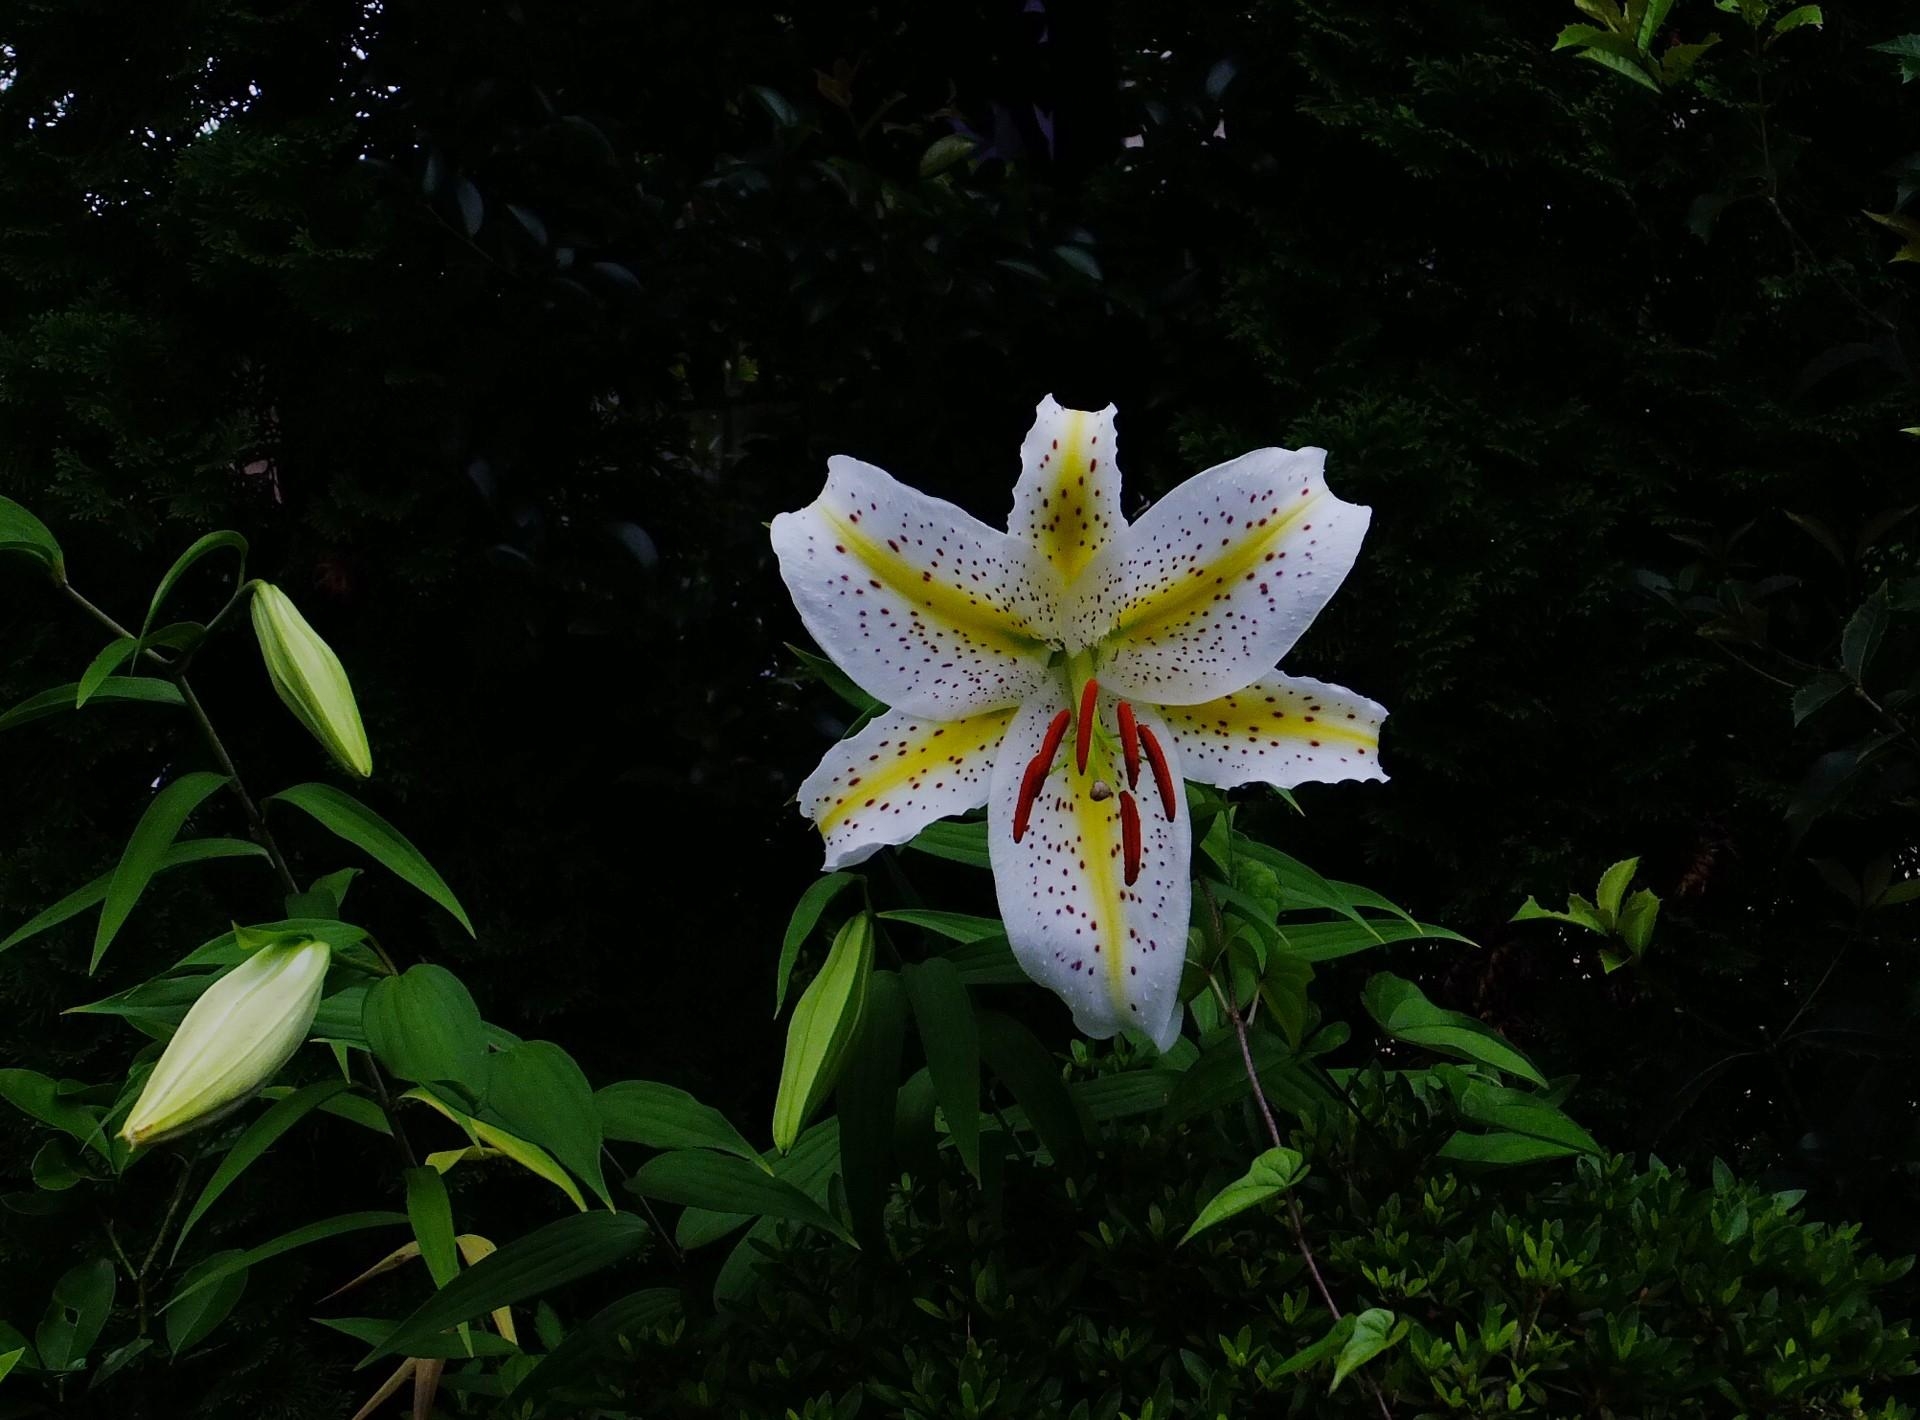 Popular Lily Image for Phone